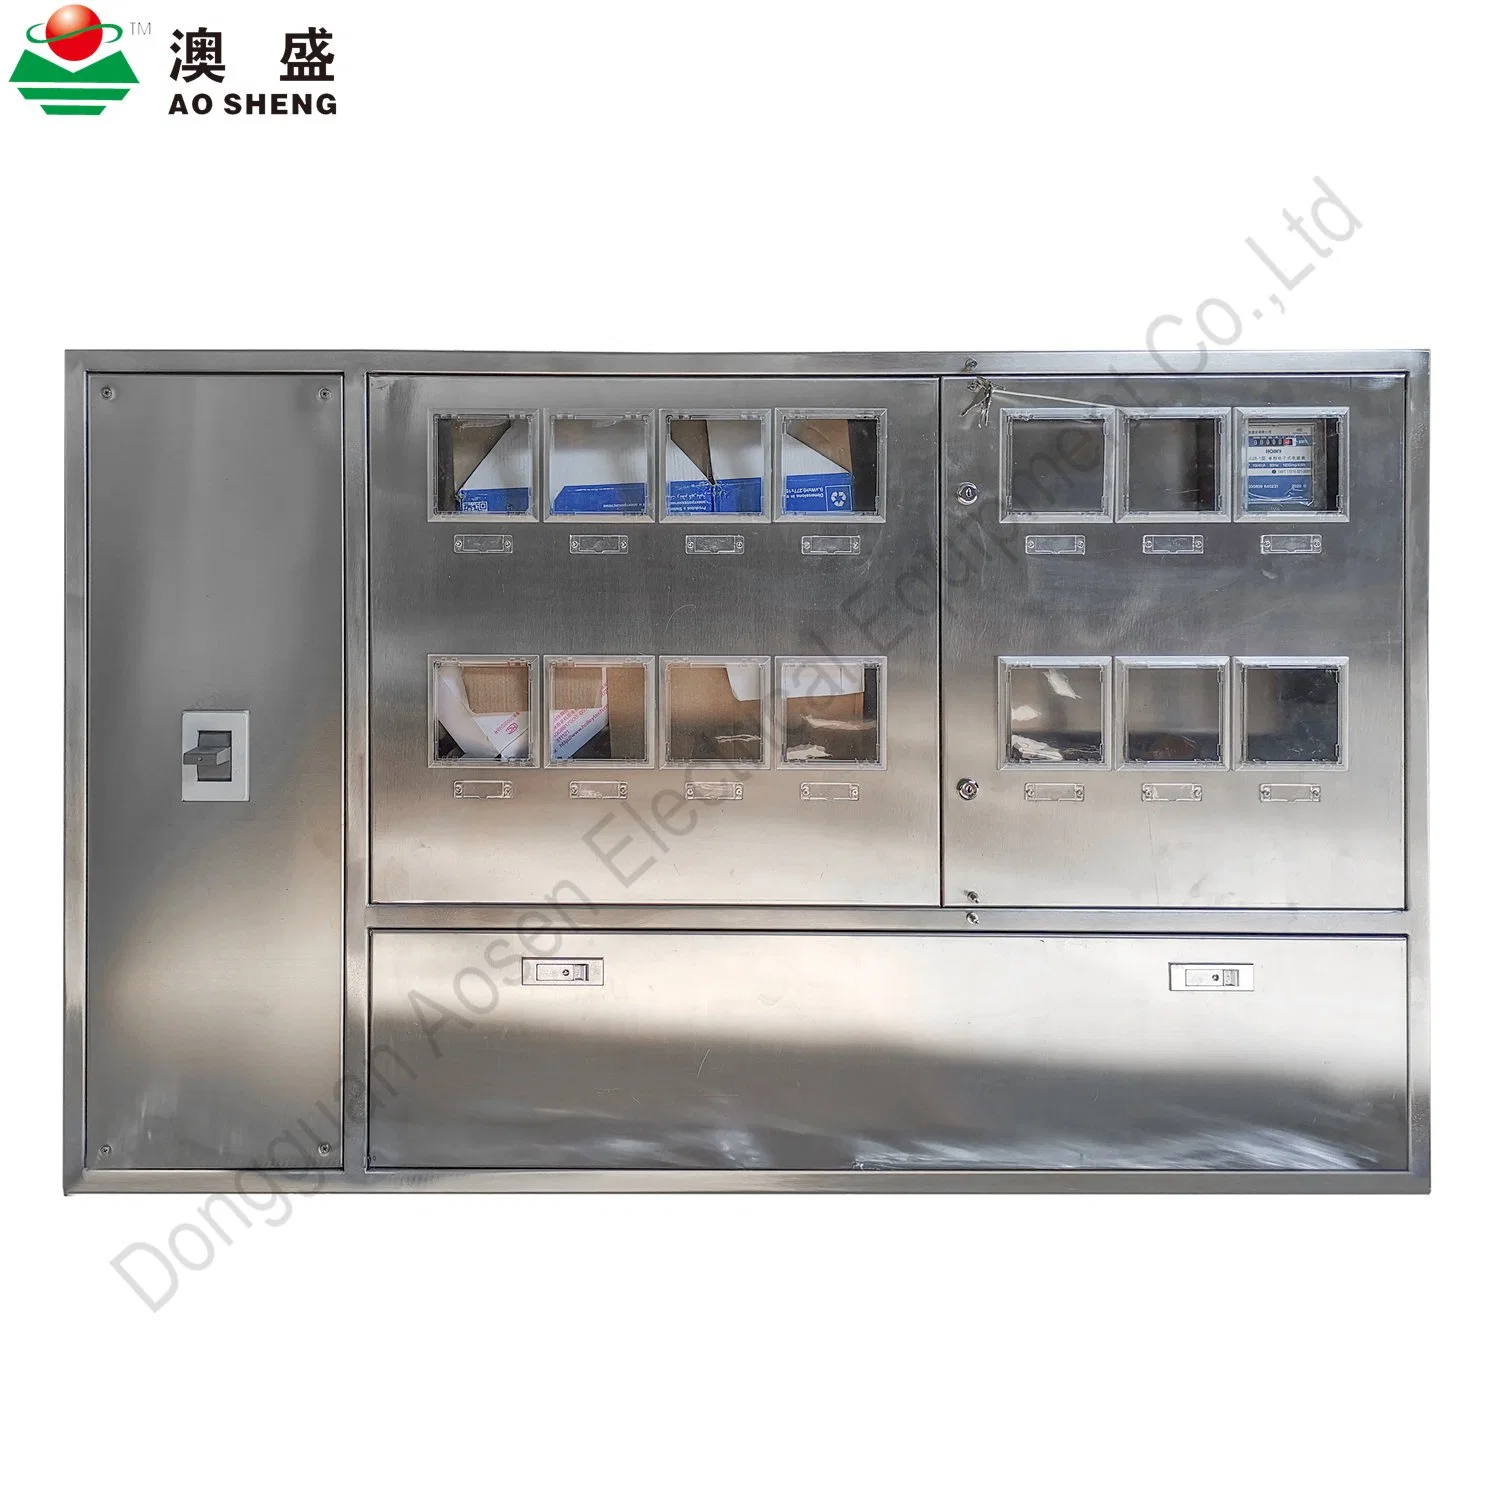 Stainless Steel Junction Box Meter Box Wall Mount Enclosure